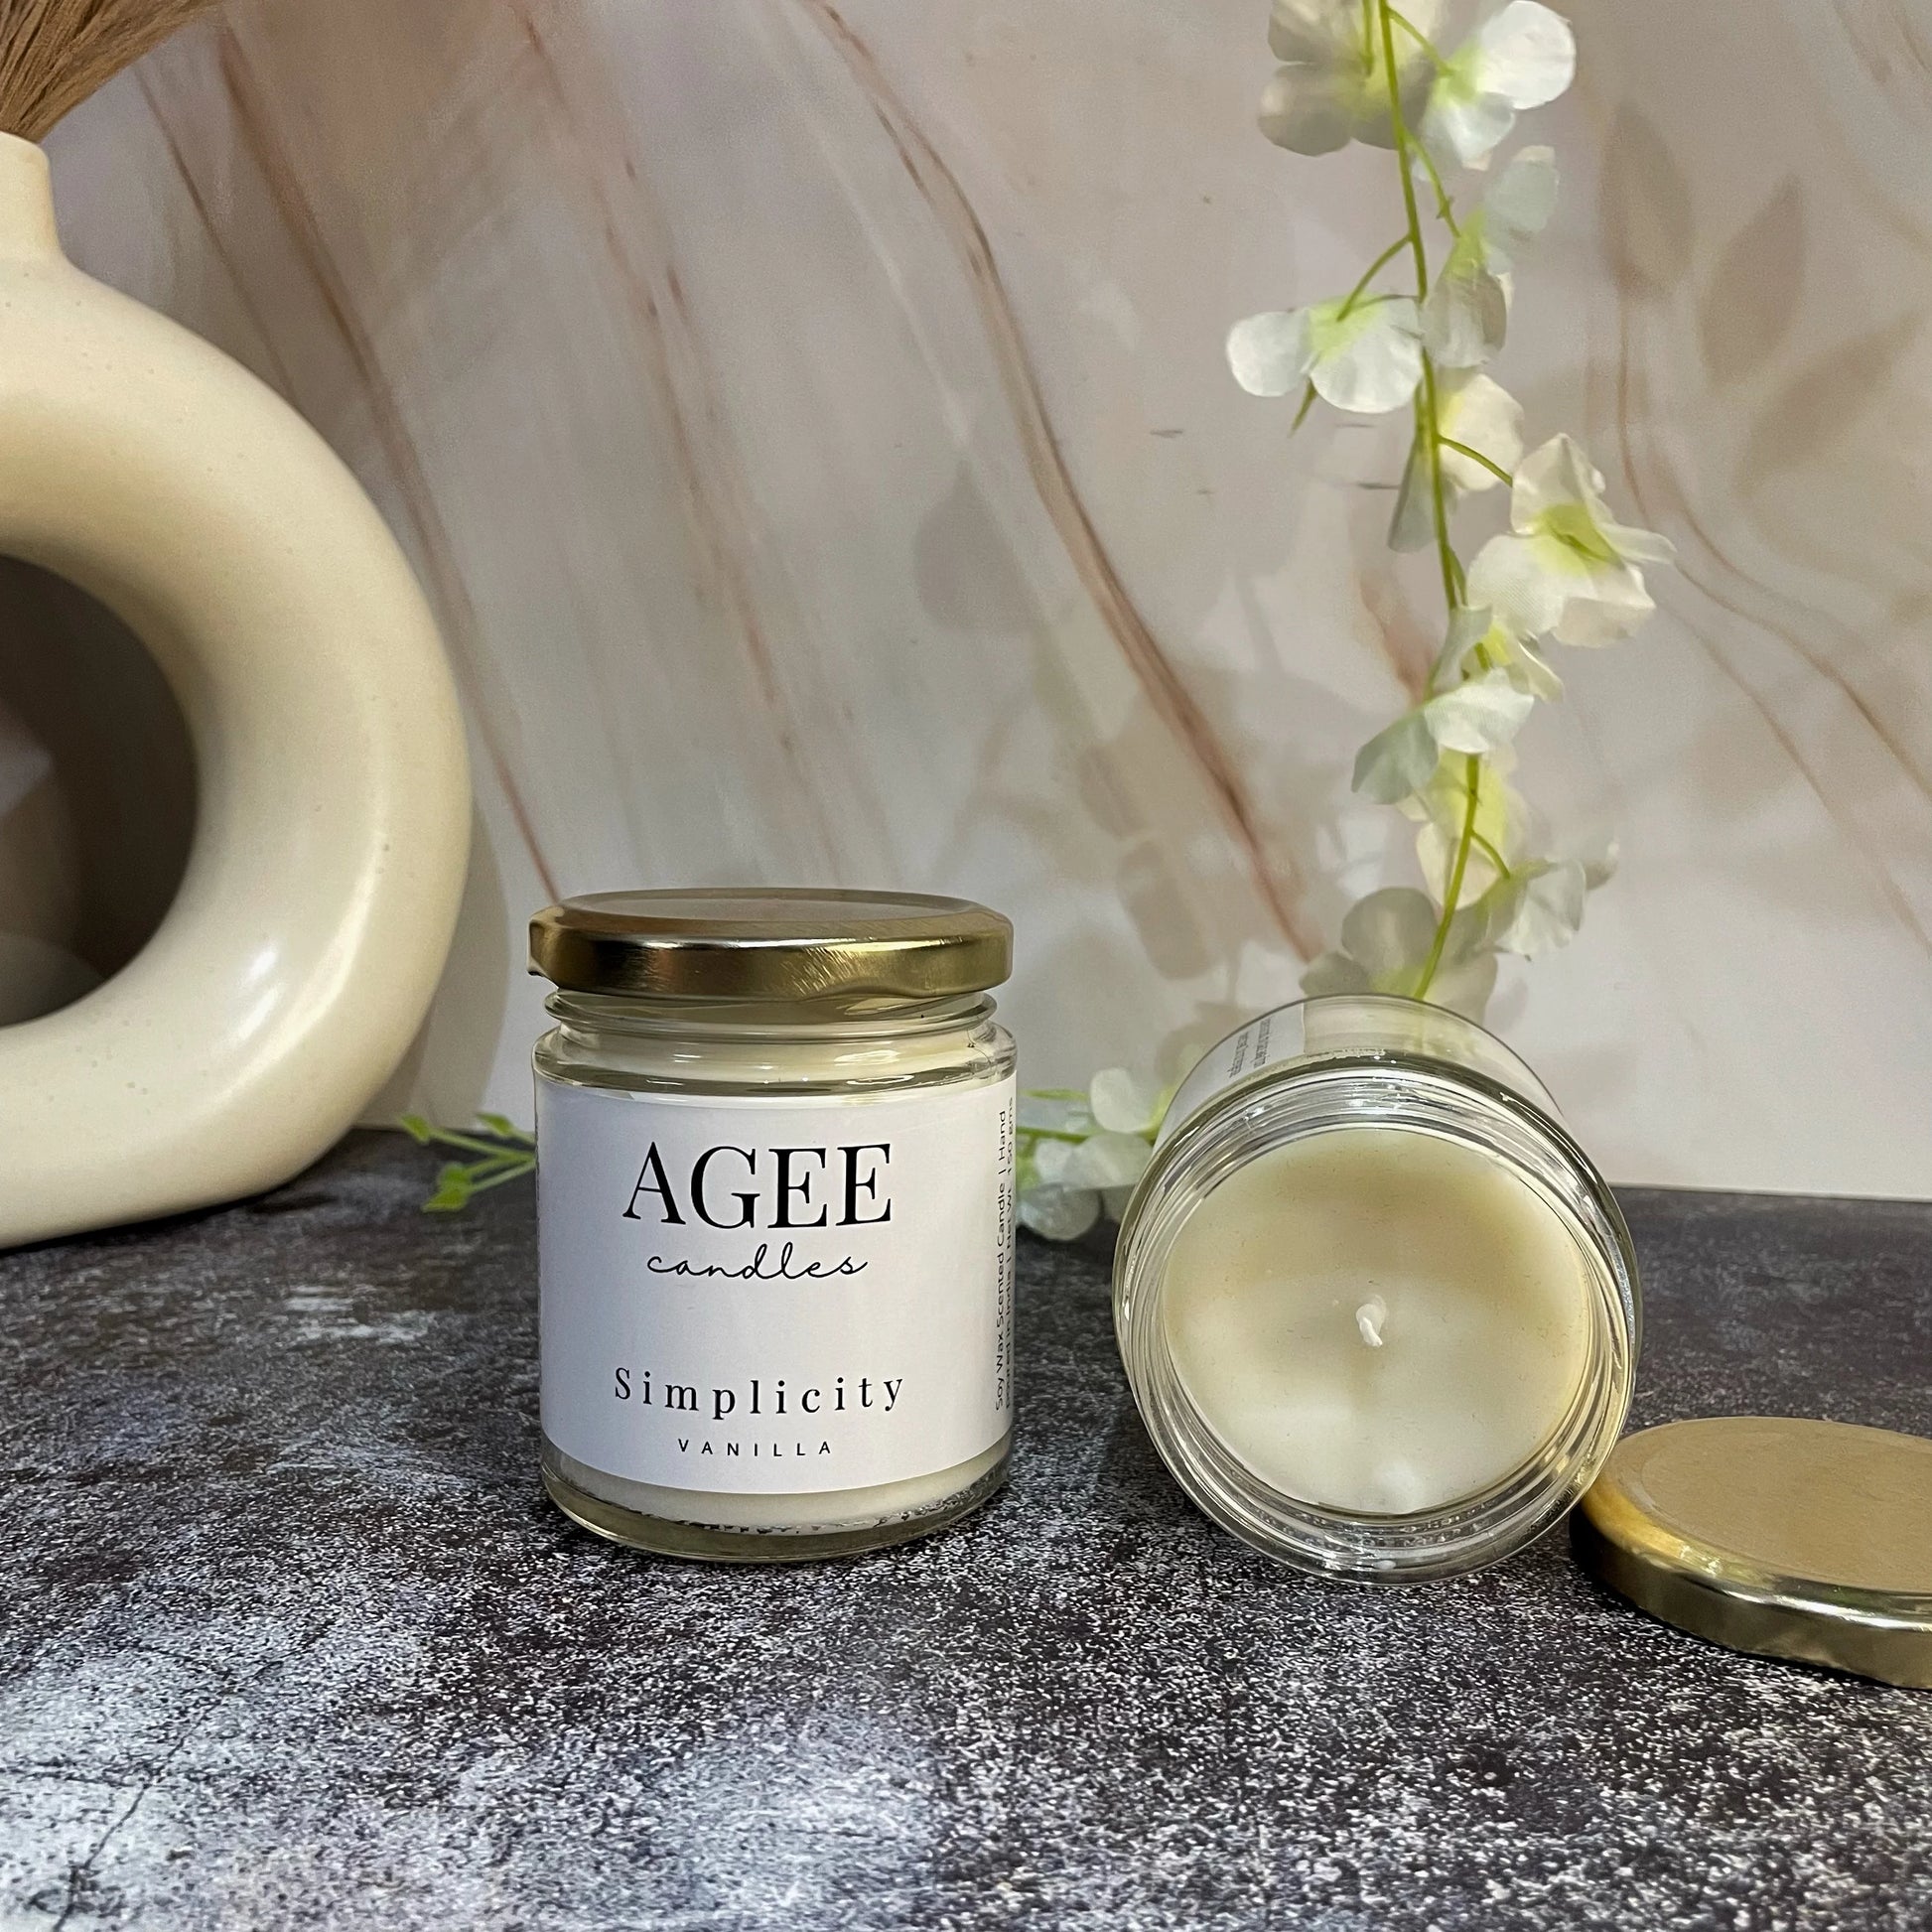 Simplicity - Vanilla Scented Candle - Clear Jar - AGEE Candles